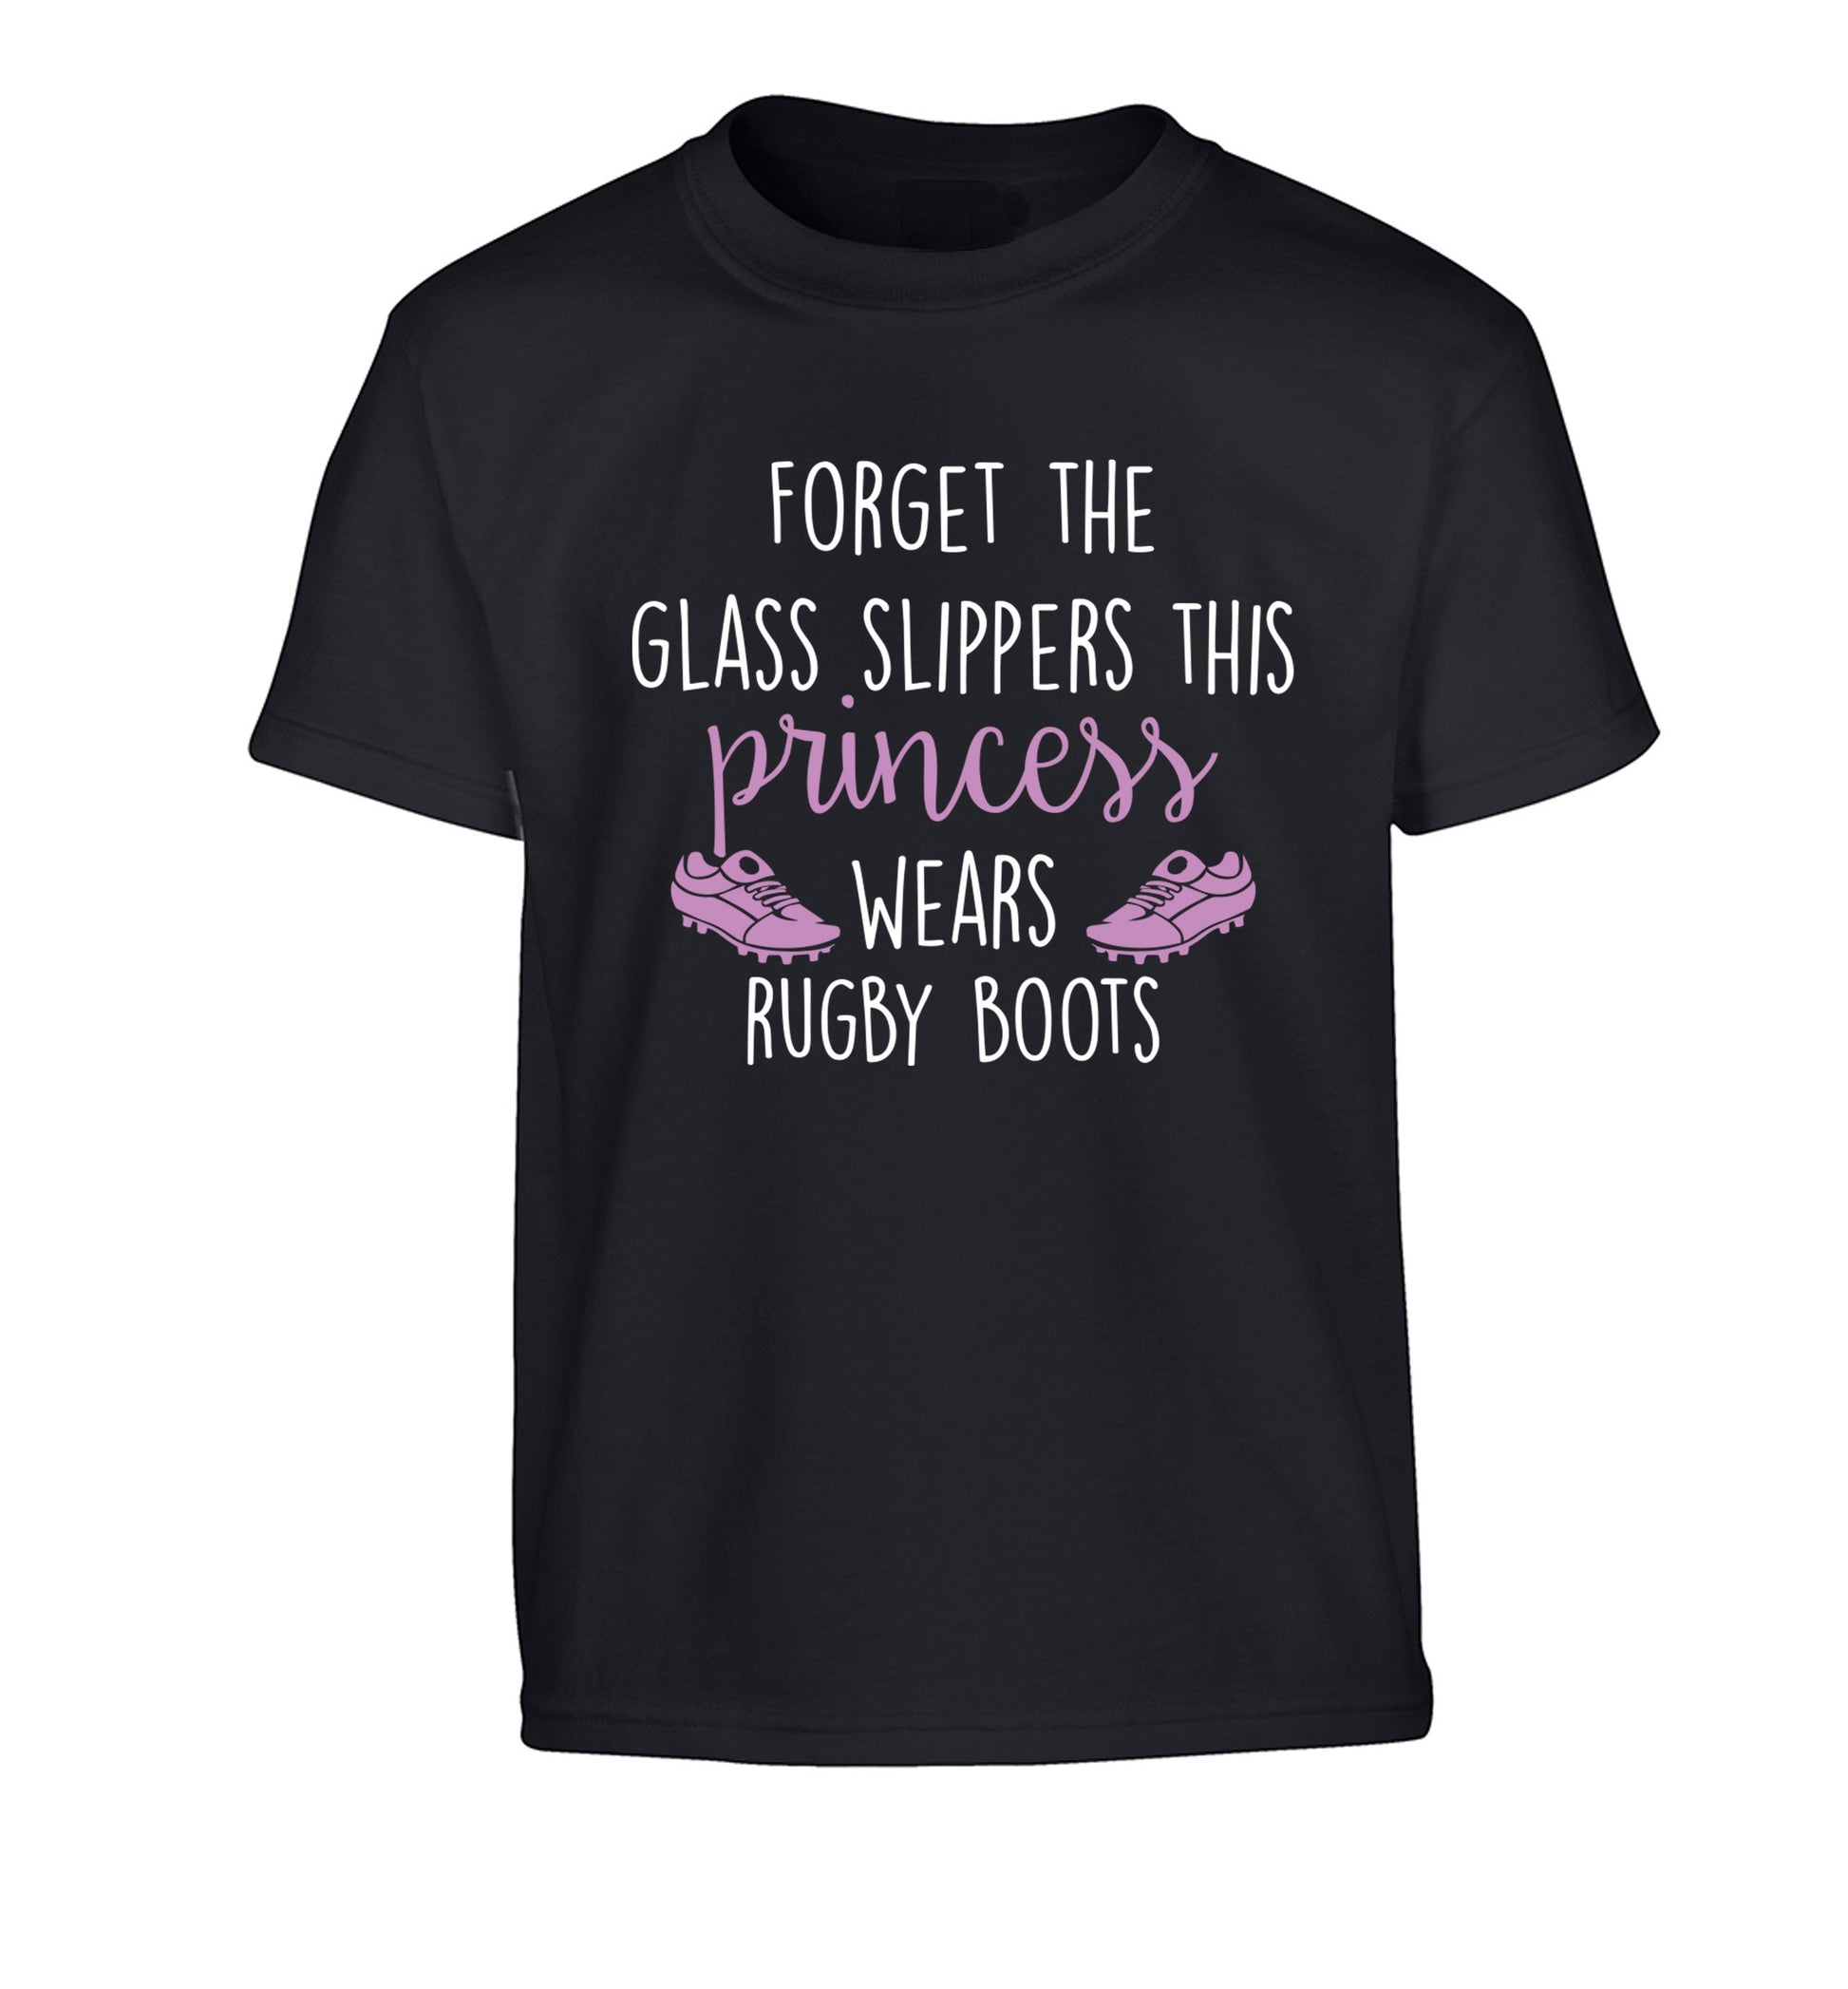 Forget the glass slippers this princess wears rugby boots Children's black Tshirt 12-14 Years